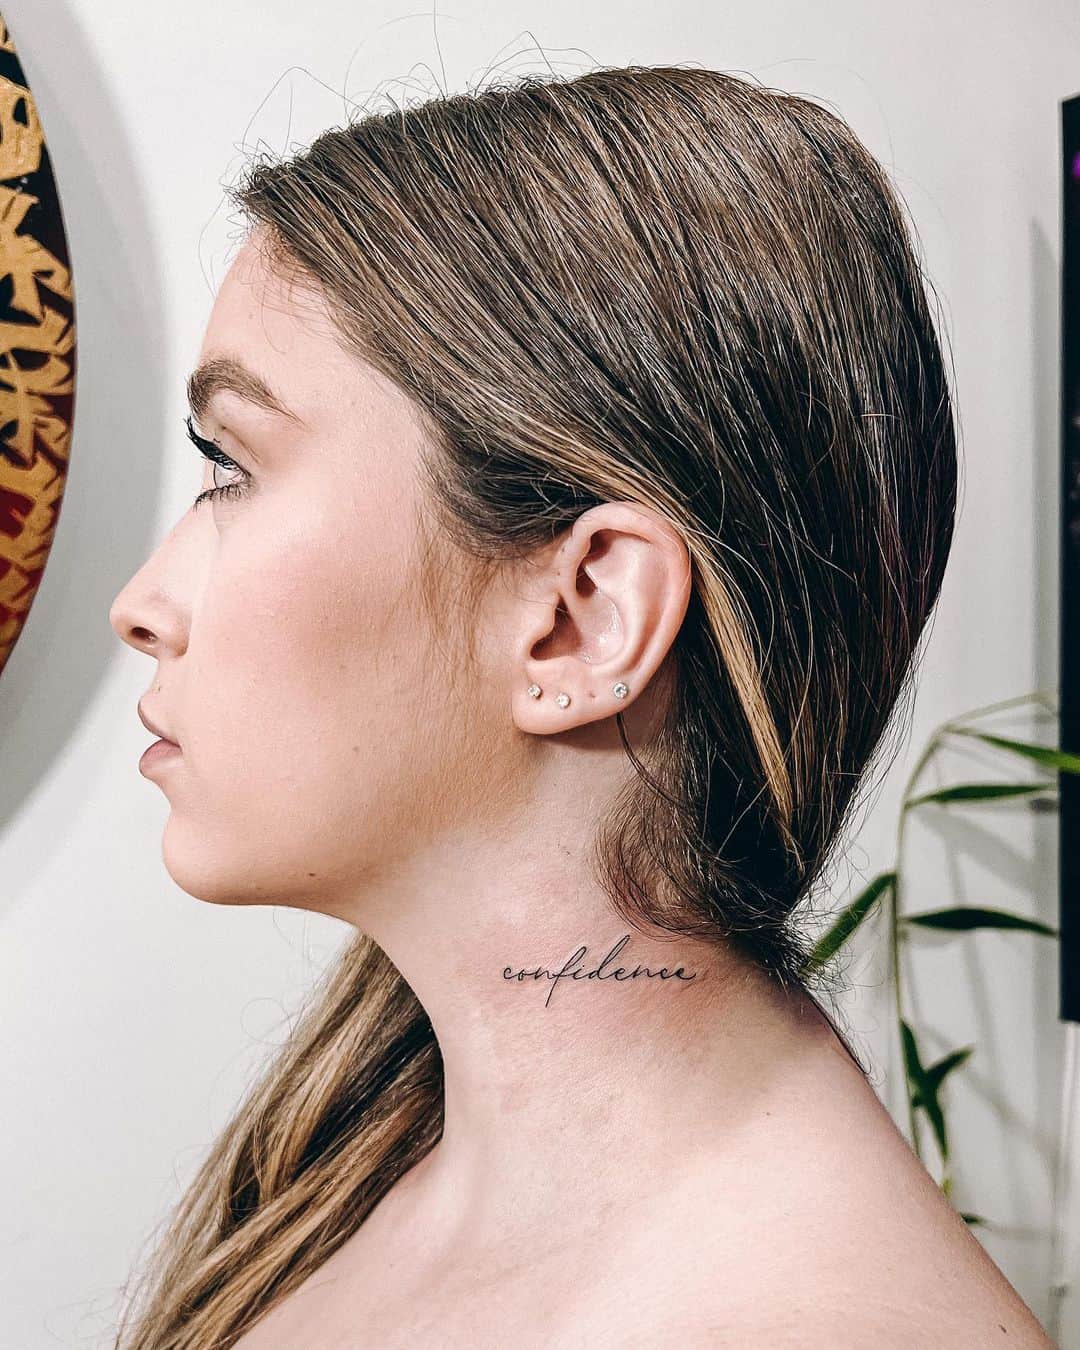 Look: Small Neck Tattoo Designs | Preview.ph